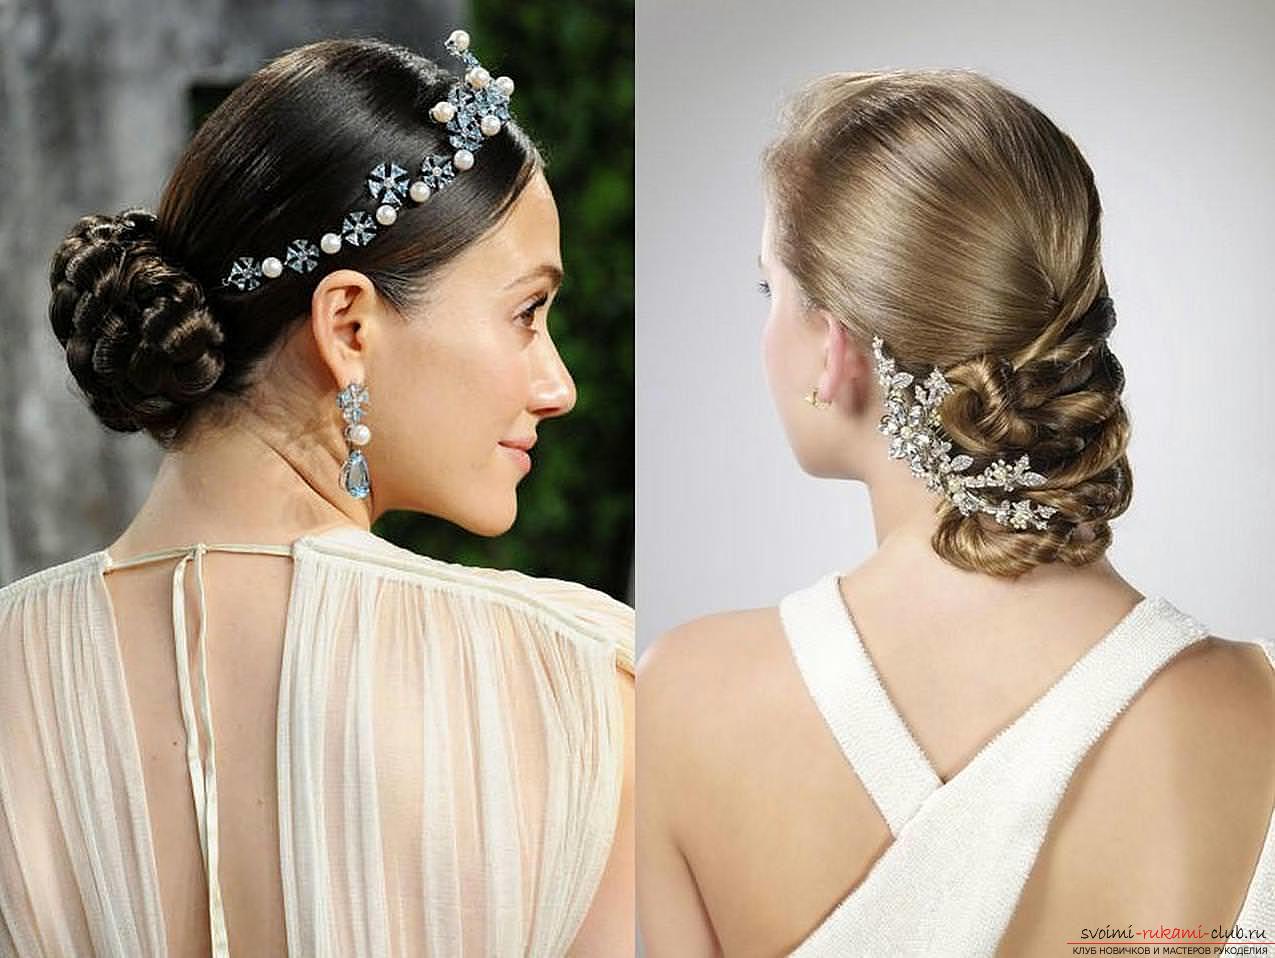 Photo gallery of wedding hairstyles for hair of different length. Photo Number 11